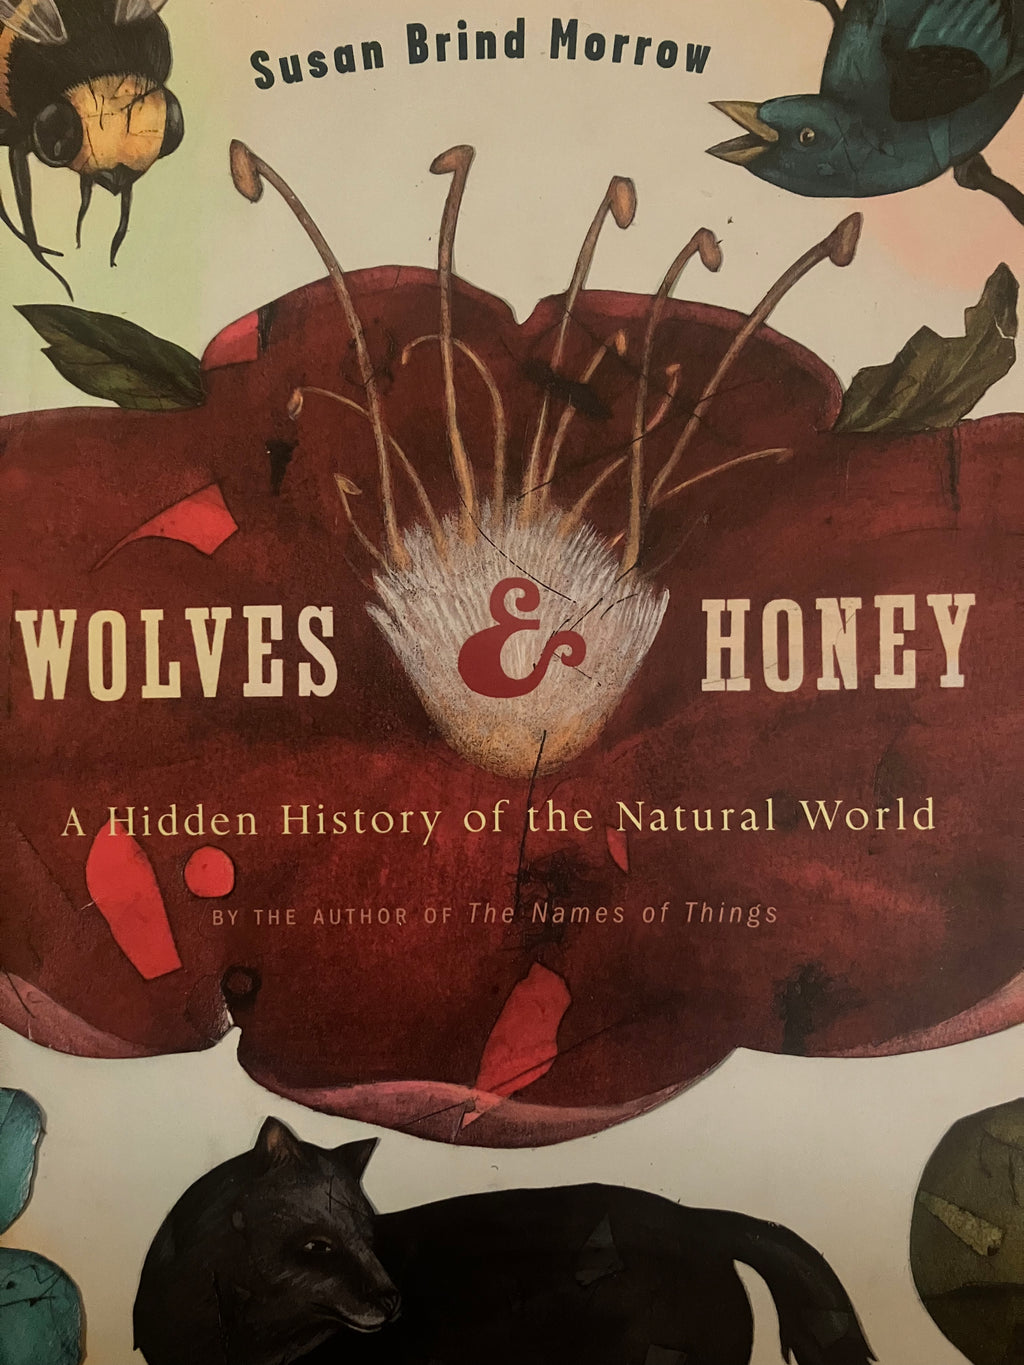 Wolves and honey book